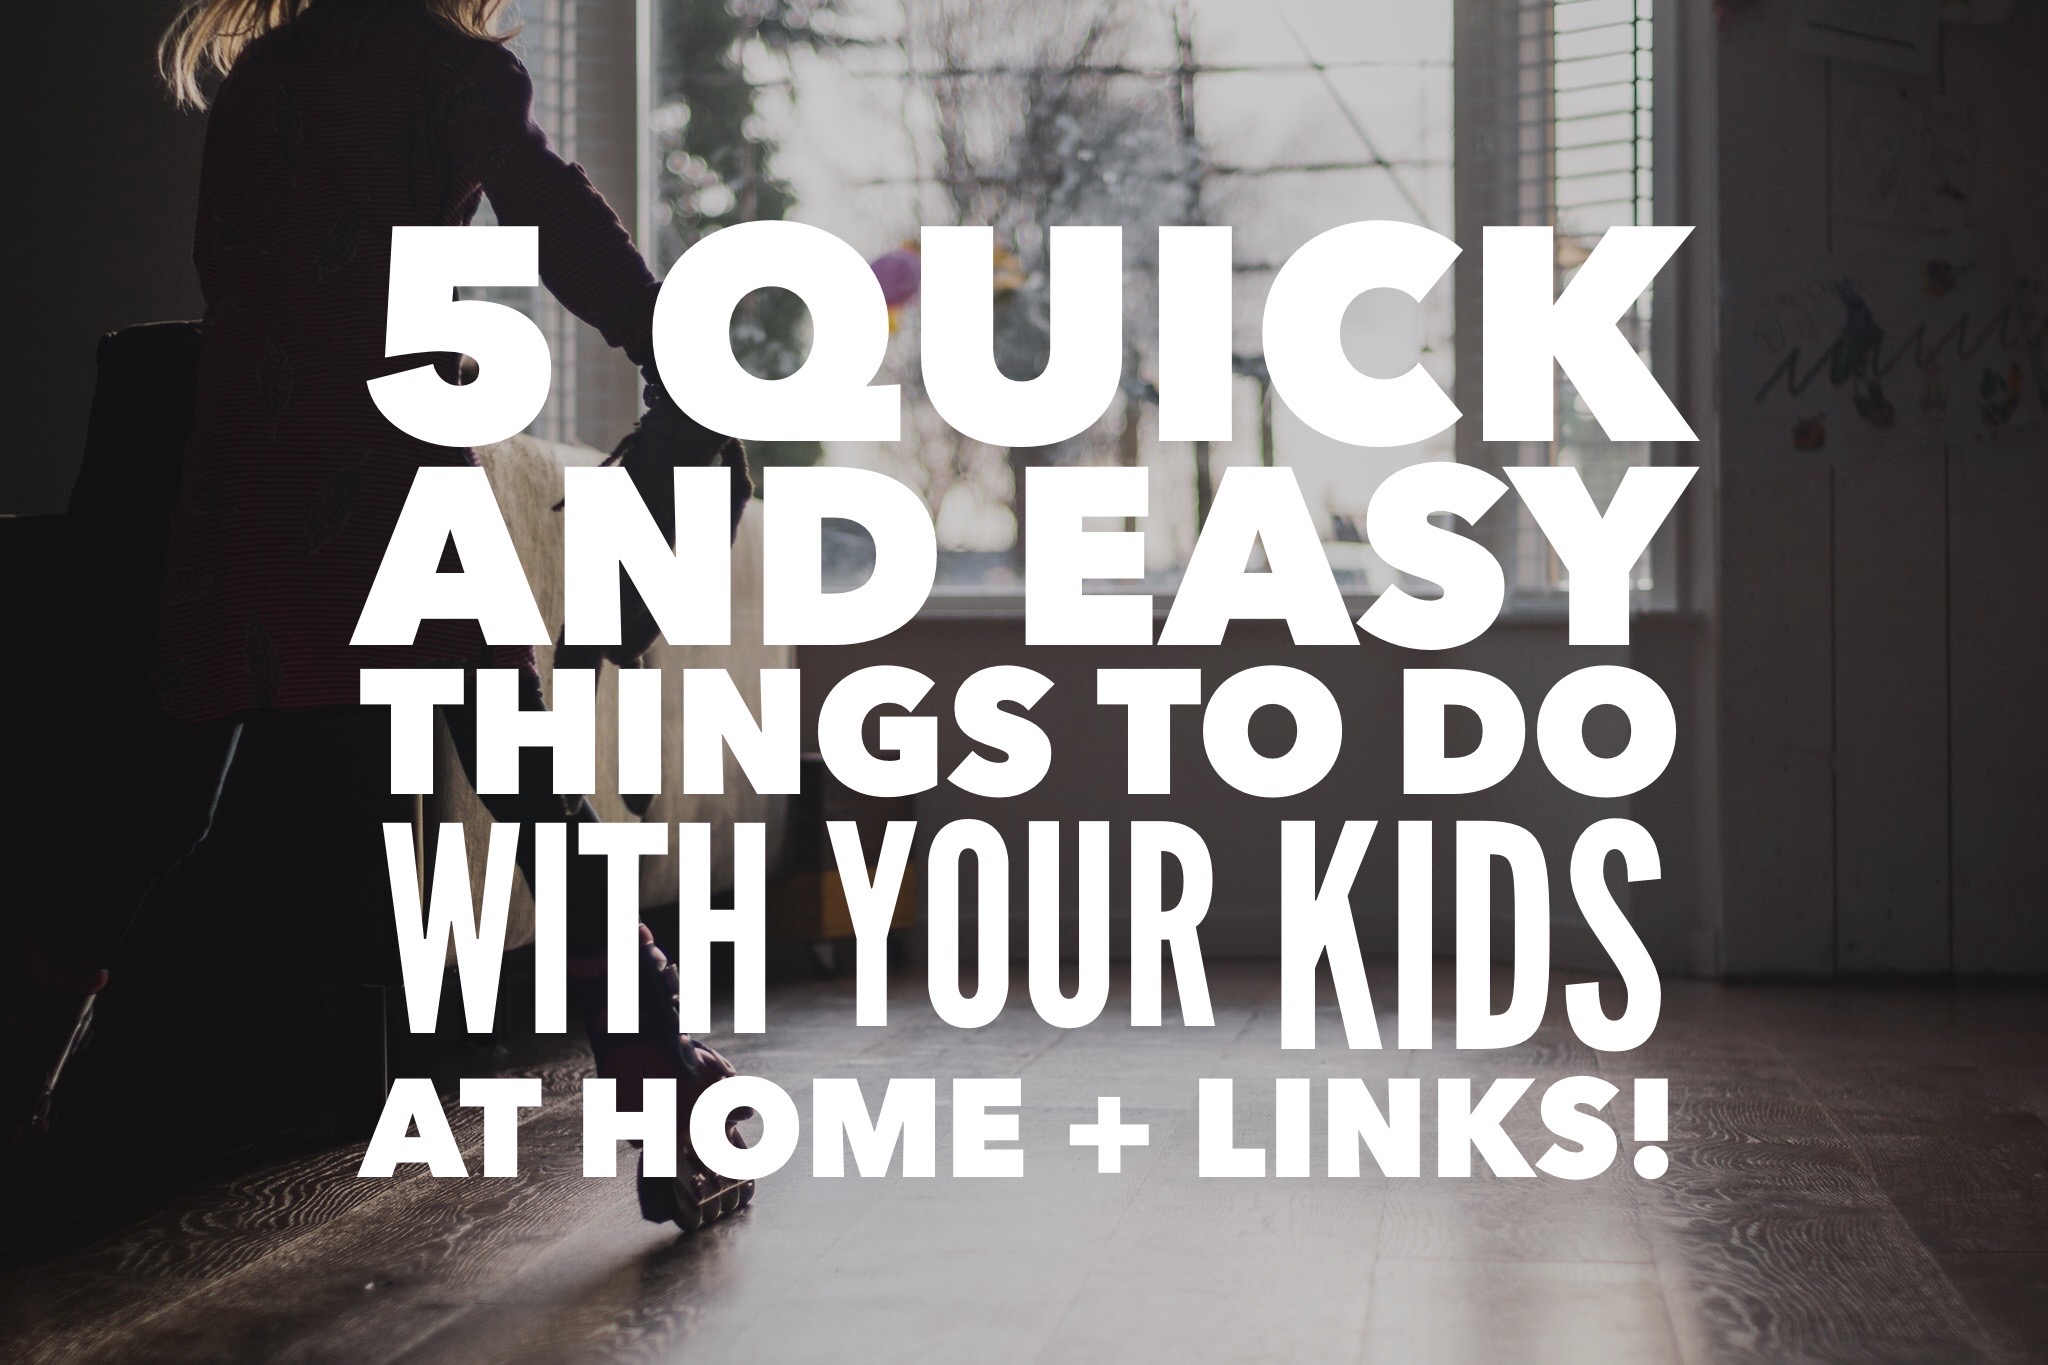 5 quick and easy things to do with your kids at home + links!